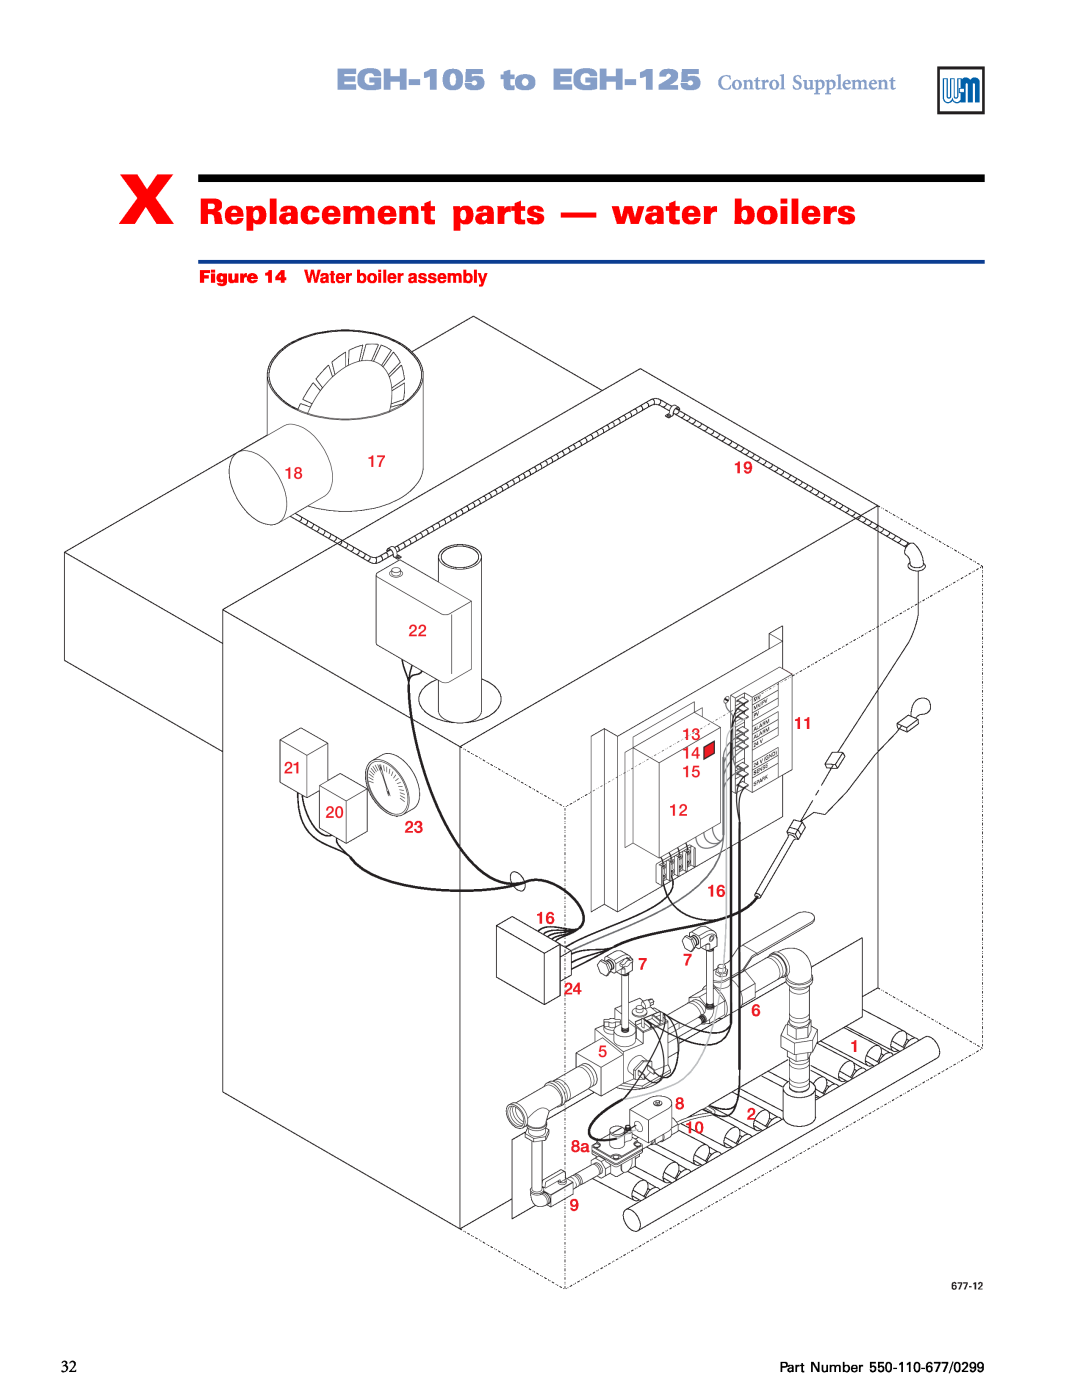 Weil-McLain X Replacement parts - water boilers, EGH-105to EGH-125 Control Supplement, Water boiler assembly, 13 14 